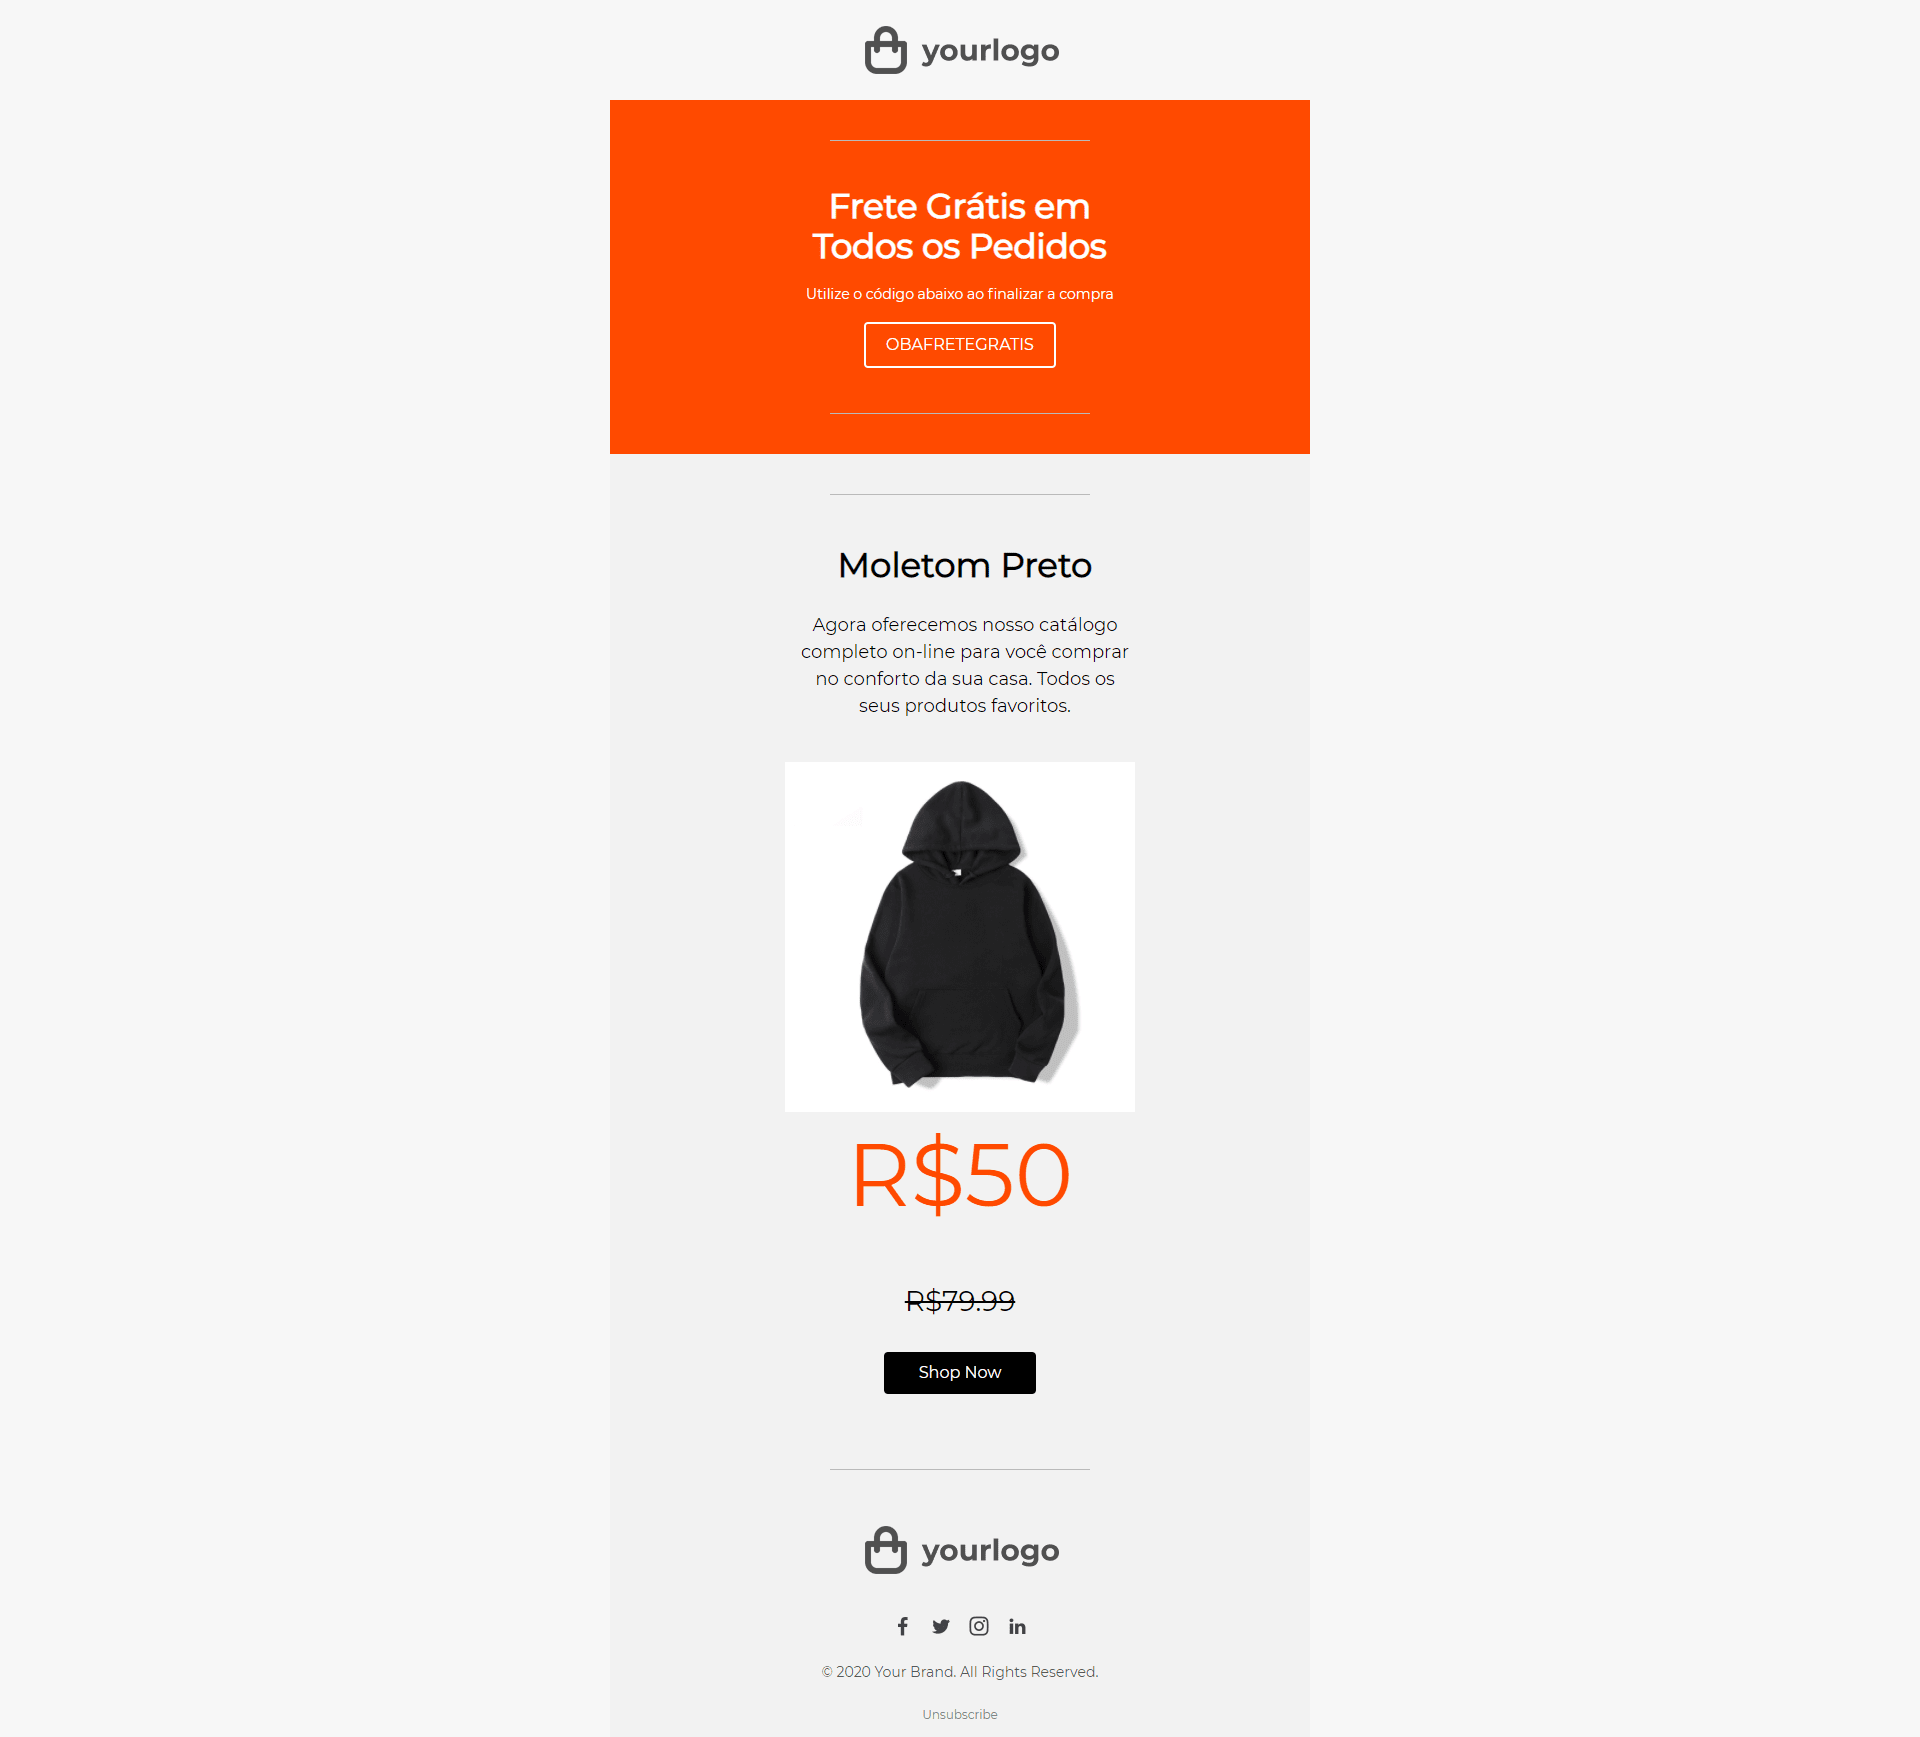 A mockup of a promotional email highlighting free shipping